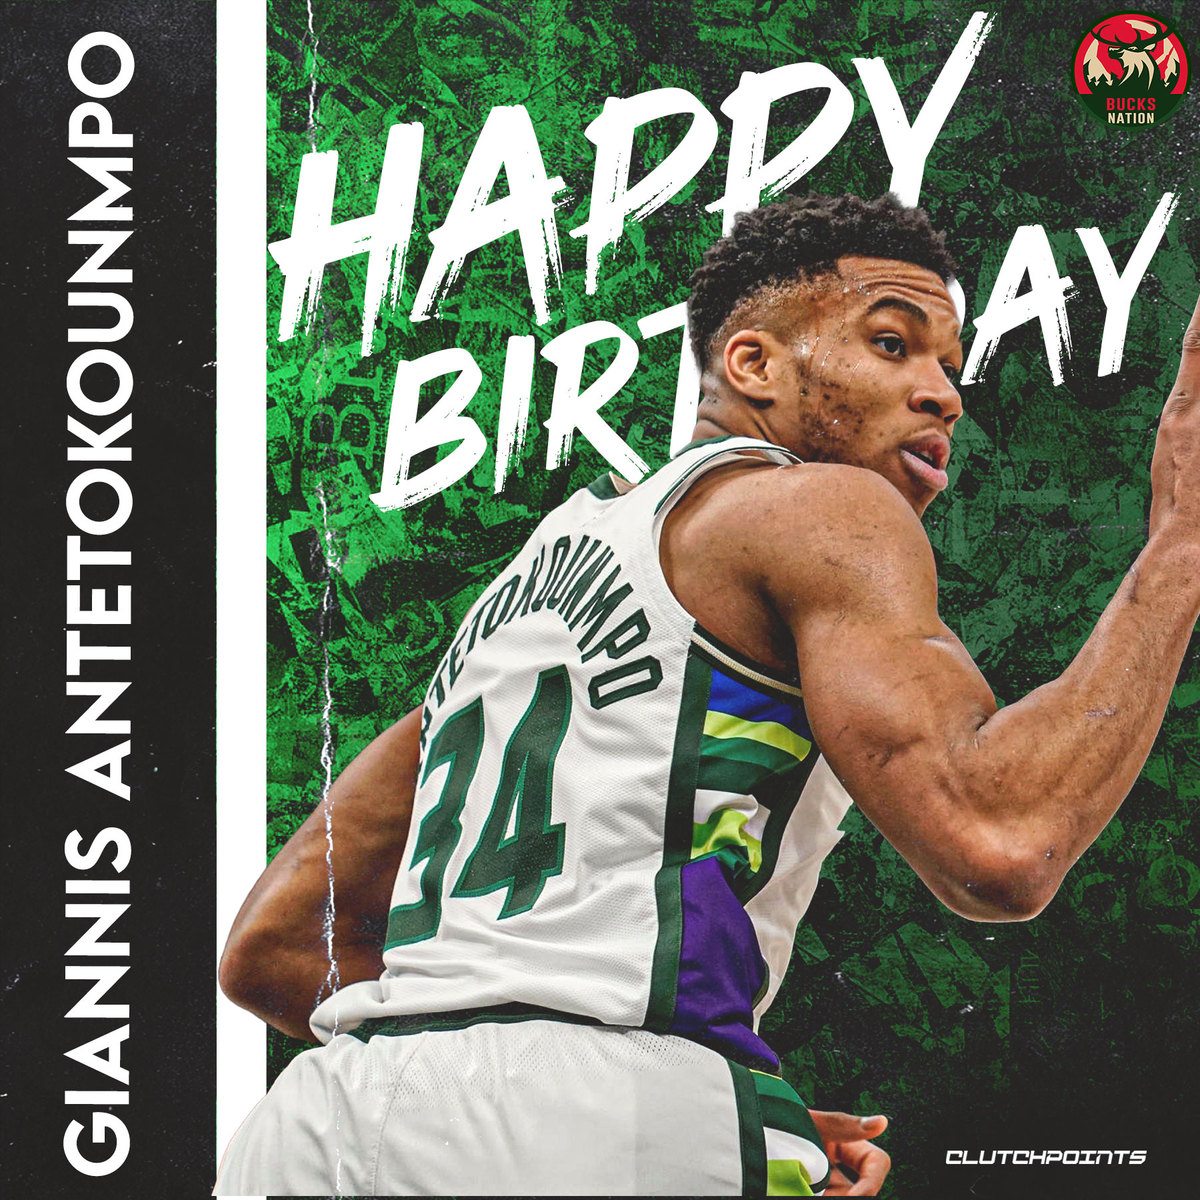 Bucks Nation on Twitter: "Join Bucks Nation as we greet our 5-time NBA  All-star, 2x MVP and 2021 Finals MVP Giannis Ugo Antetokounmpo a happy 27th  birthday! 🥳 https://t.co/h2b1lSZIb8" / X